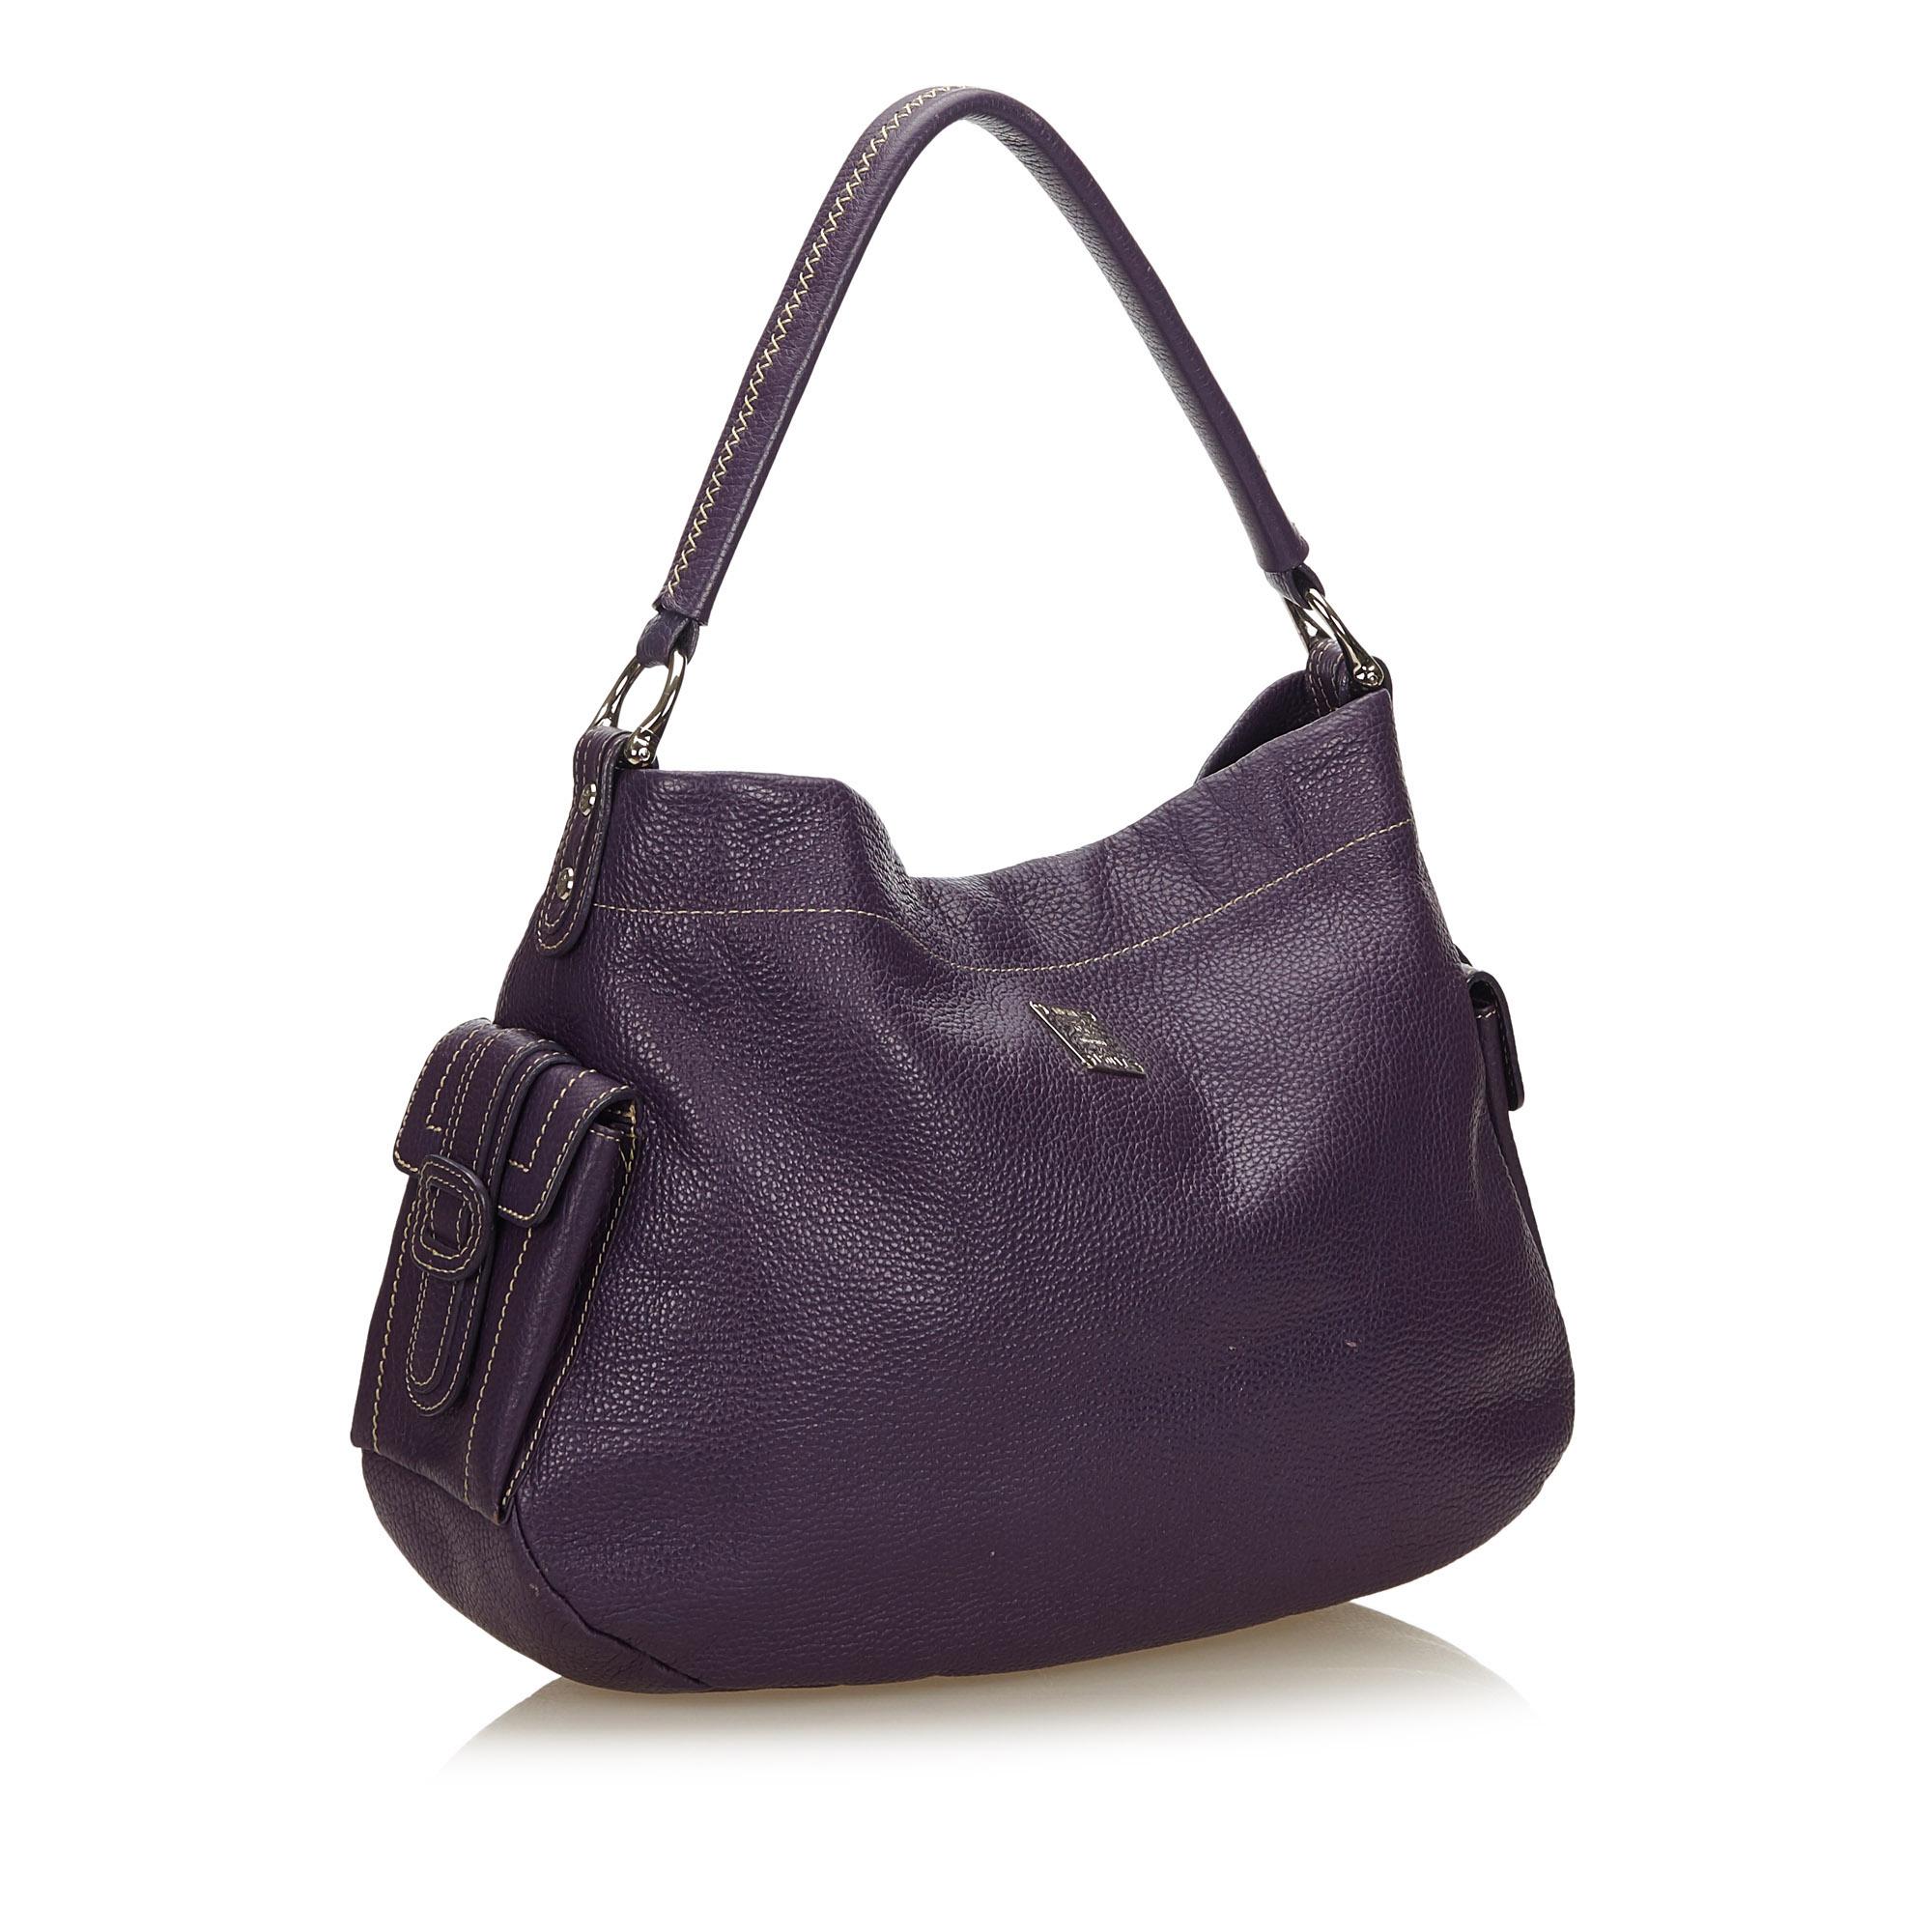 This handbag features a leather body, flat leather strap, open top, exterior flap pockets with magnetic closures, and interior zip and slip pocket. It carries as AB condition rating.

Inclusions: 
This item does not come with